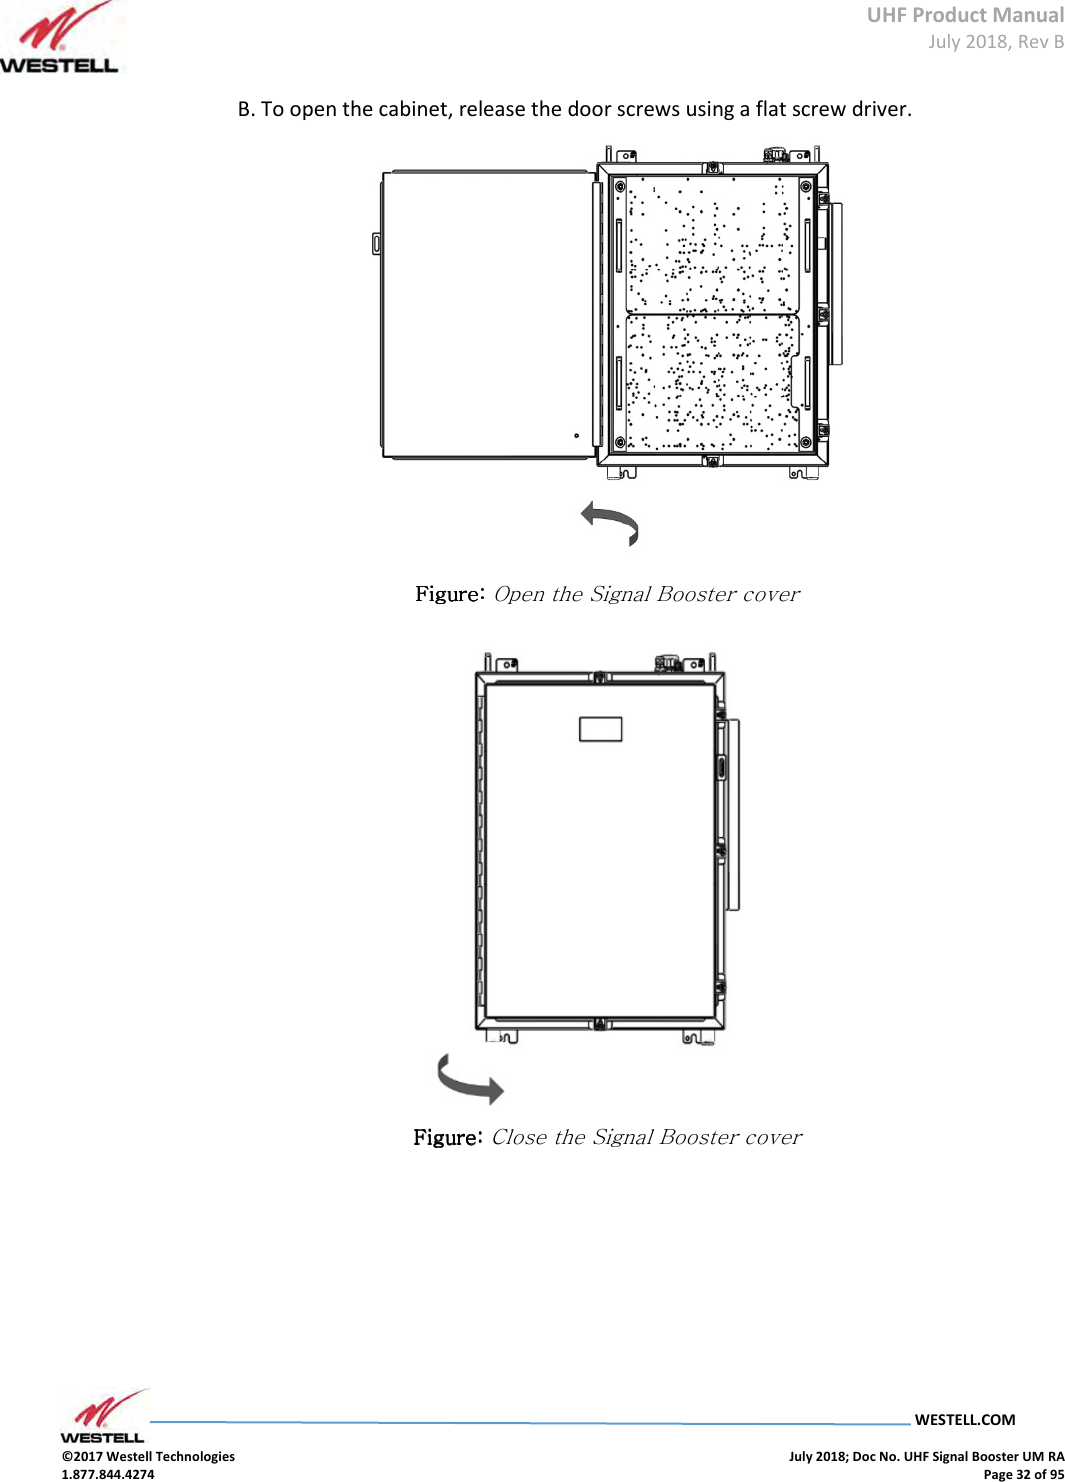 UHF Product Manual July 2018, Rev B   WESTELL.COM  ©2017 Westell Technologies    July 2018; Doc No. UHF Signal Booster UM RA 1.877.844.4274    Page 32 of 95  B. To open the cabinet, release the door screws using a flat screw driver.     Figure: Figure: Figure: Figure: Open the Signal Booster cover  Figure: Figure: Figure: Figure: Close the Signal Booster cover  